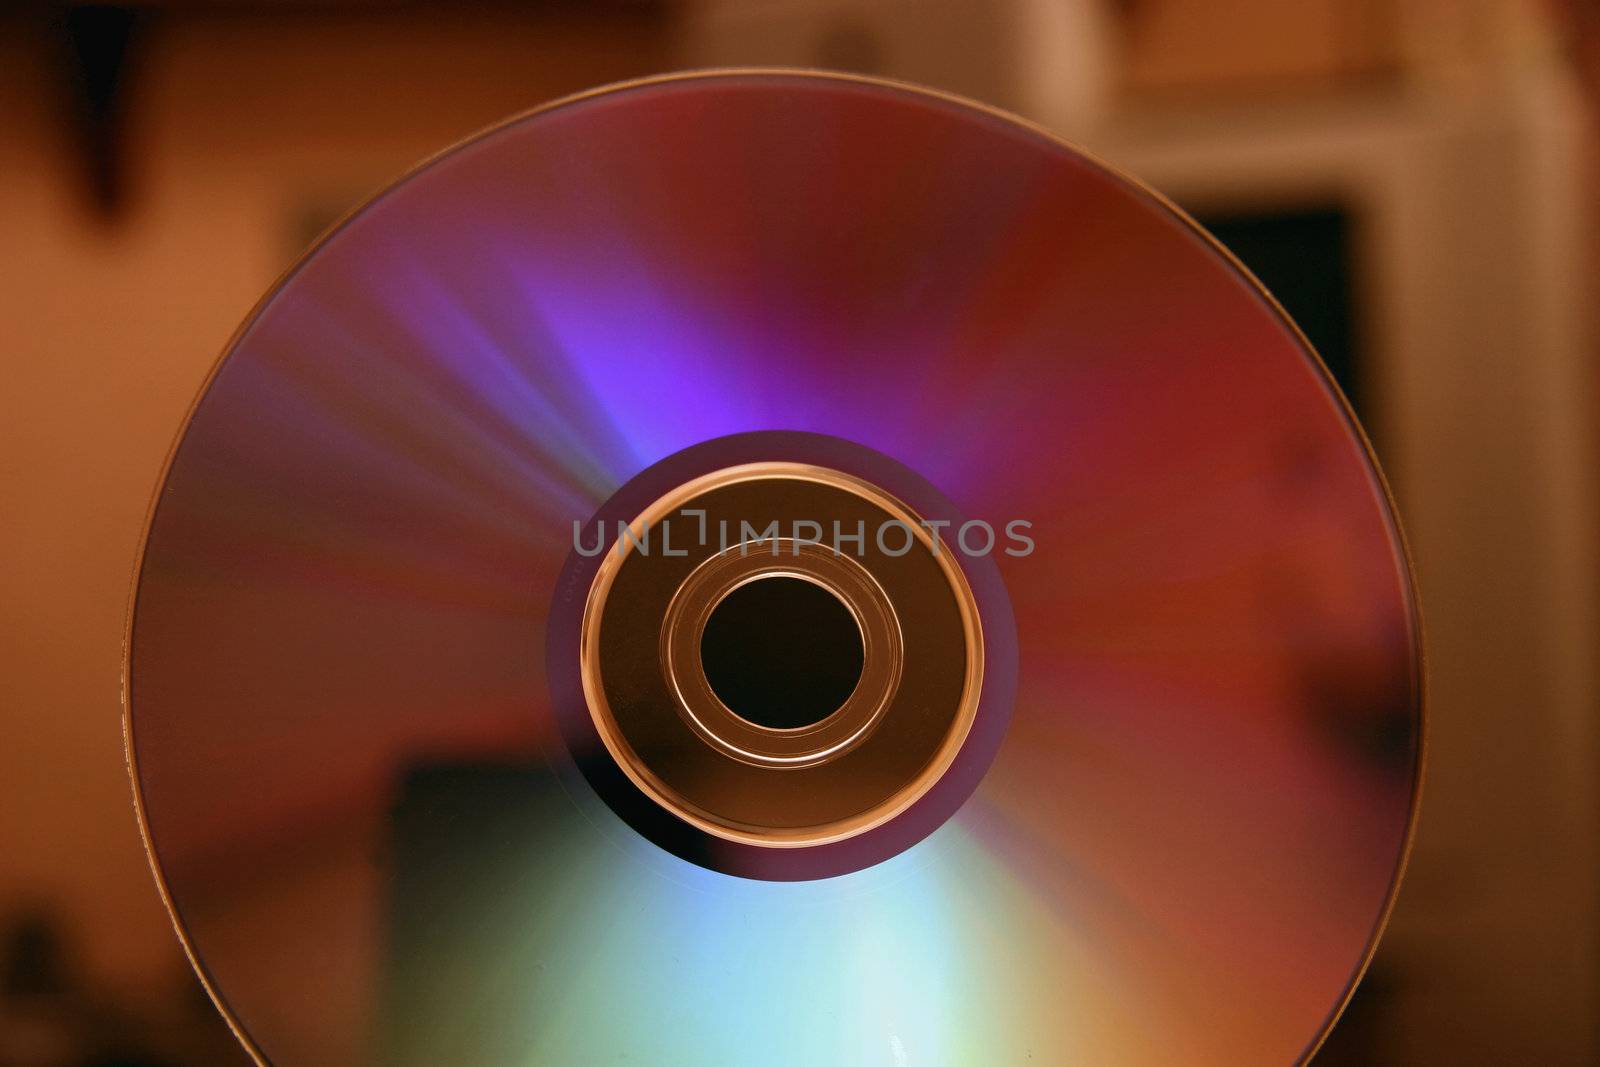 dvd or cd used as storage media for electronic data